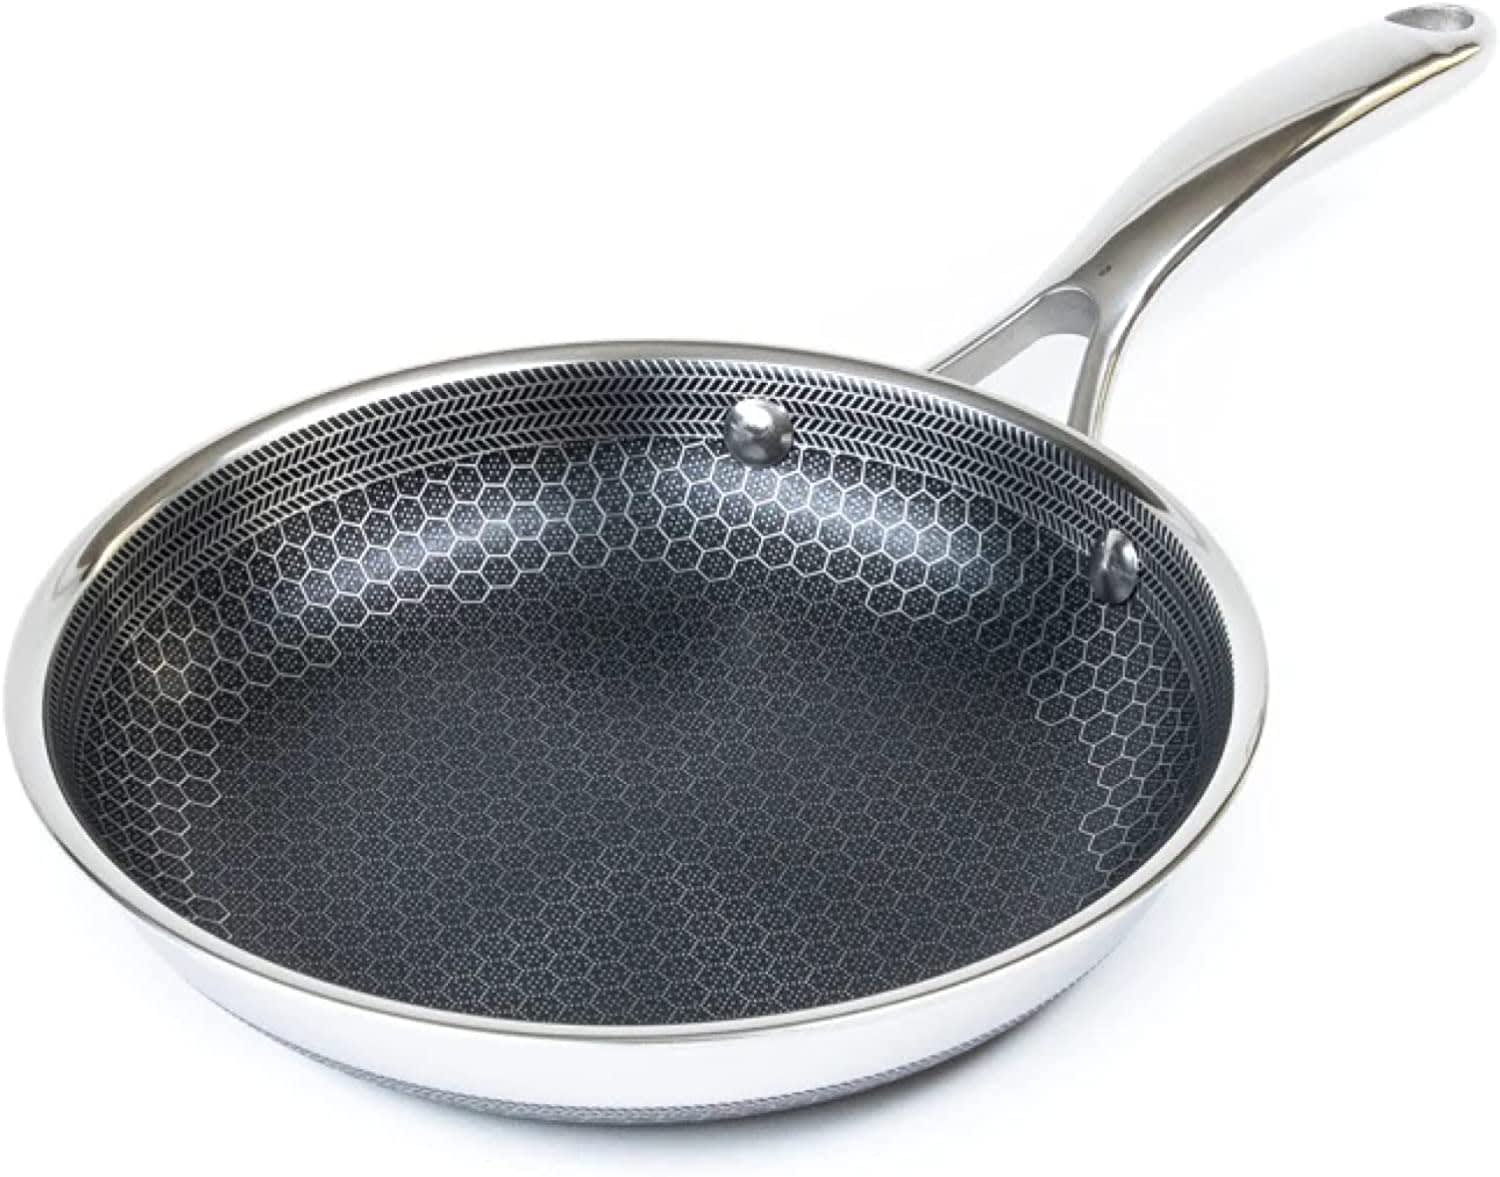 HexClad 8 Inch Hybrid Stainless Steel Frying Pan with Stay-Cool Handle